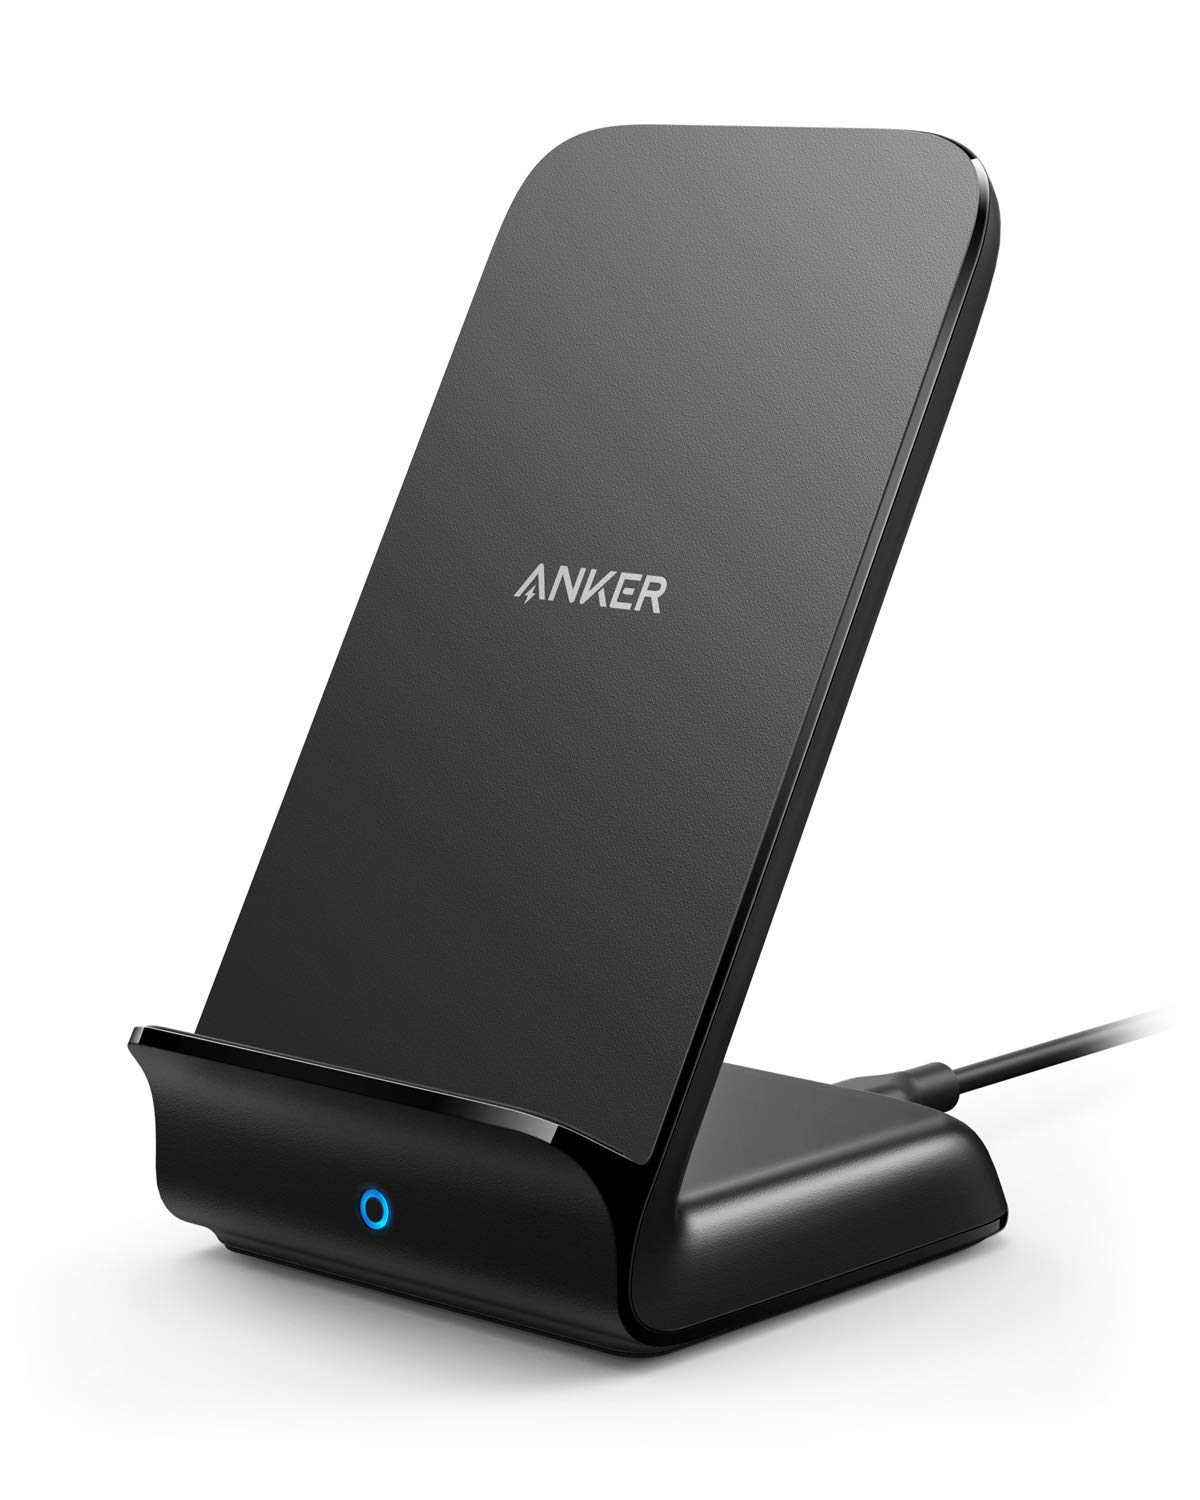 Anker Wireless Charging Stand for iPhone On Sale for $23.99 [Deal]